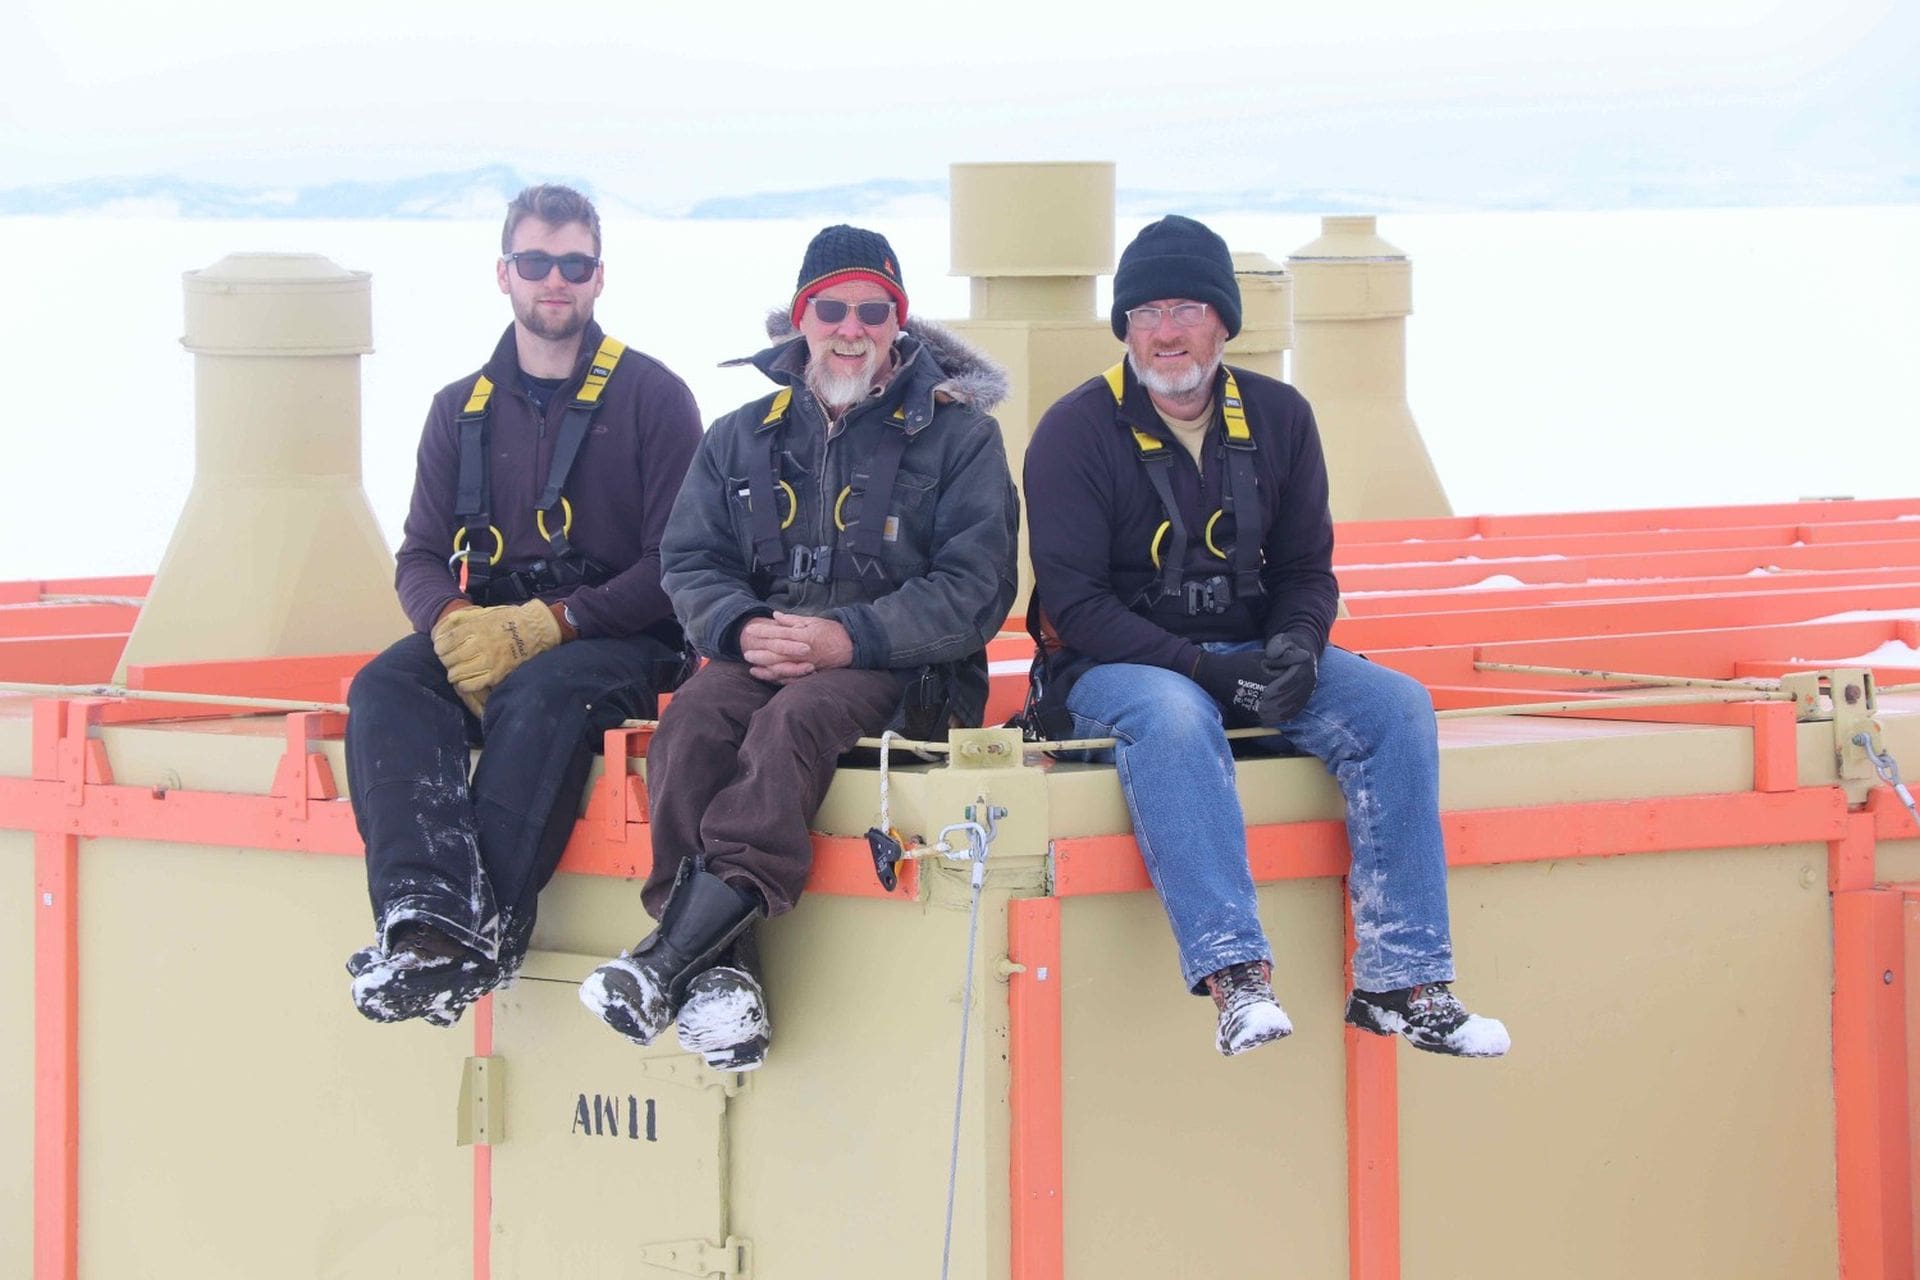 Chris Ansin, Al Fastier and Geoff Cooper taking a break on the roof of the hut.